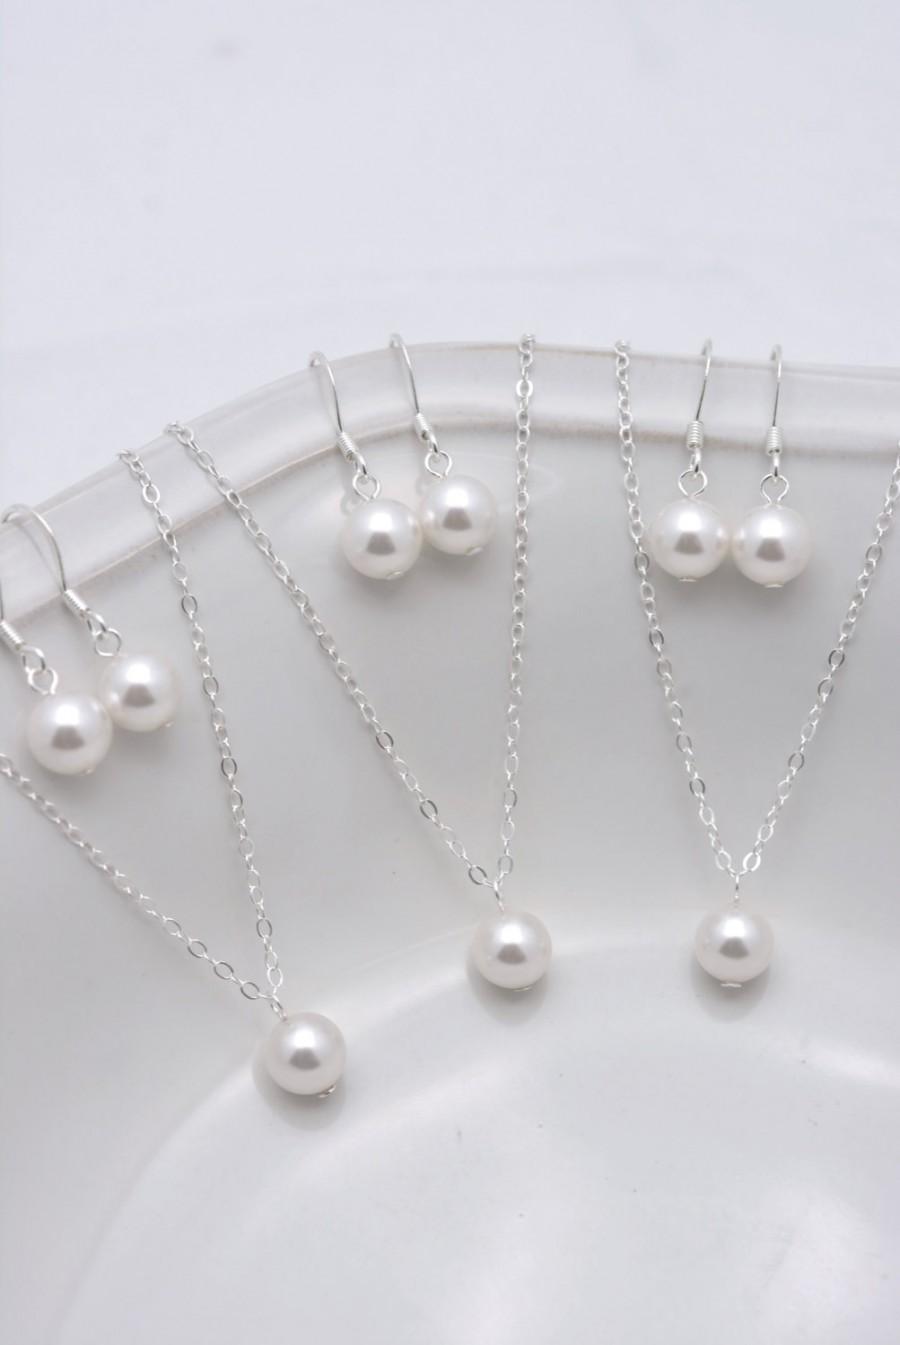 Wedding - Set of 6 Bridesmaid Pearl Necklace and Earring Sets, 6 Pearl Bridesmaid Sets, Pearl Sets, One Pearl Necklace - Sterling Silver Chain 0133